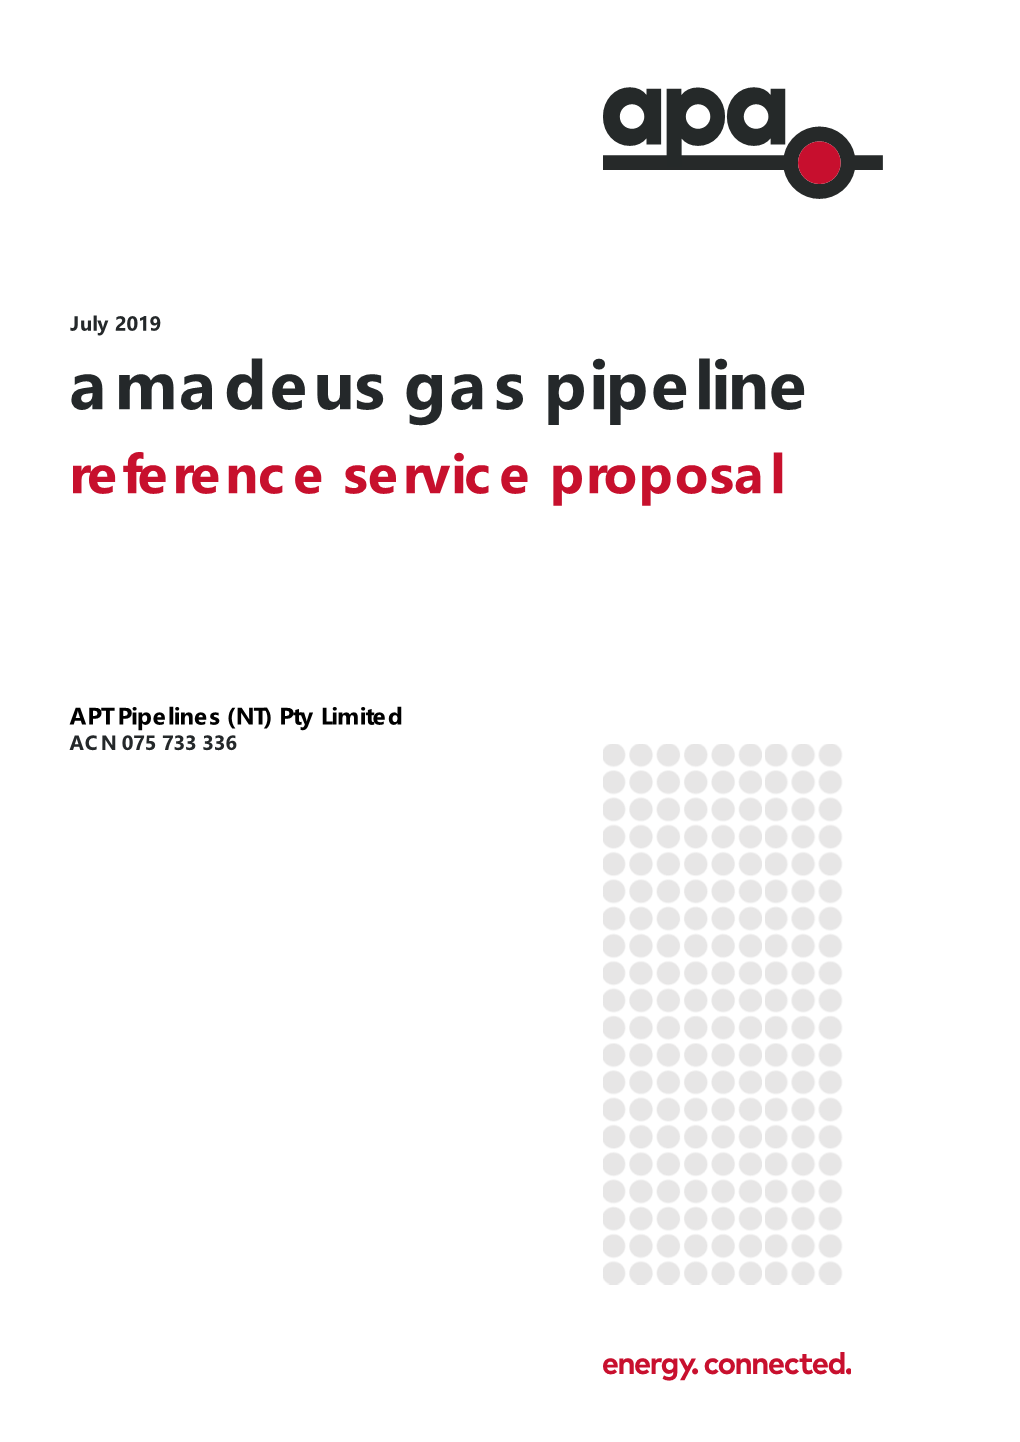 Amadeus Gas Pipeline Reference Service Proposal